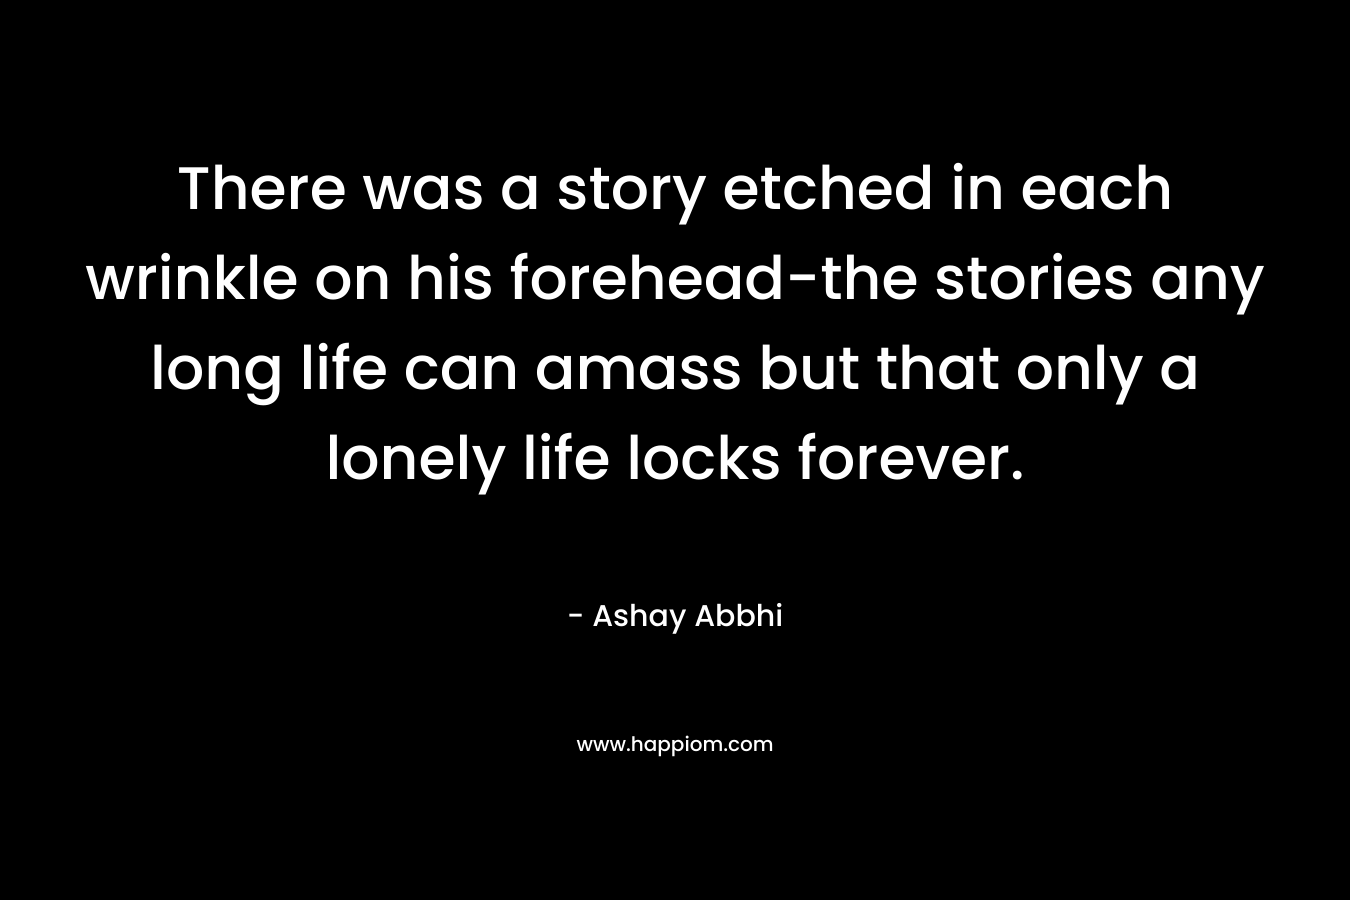 There was a story etched in each wrinkle on his forehead-the stories any long life can amass but that only a lonely life locks forever. – Ashay Abbhi